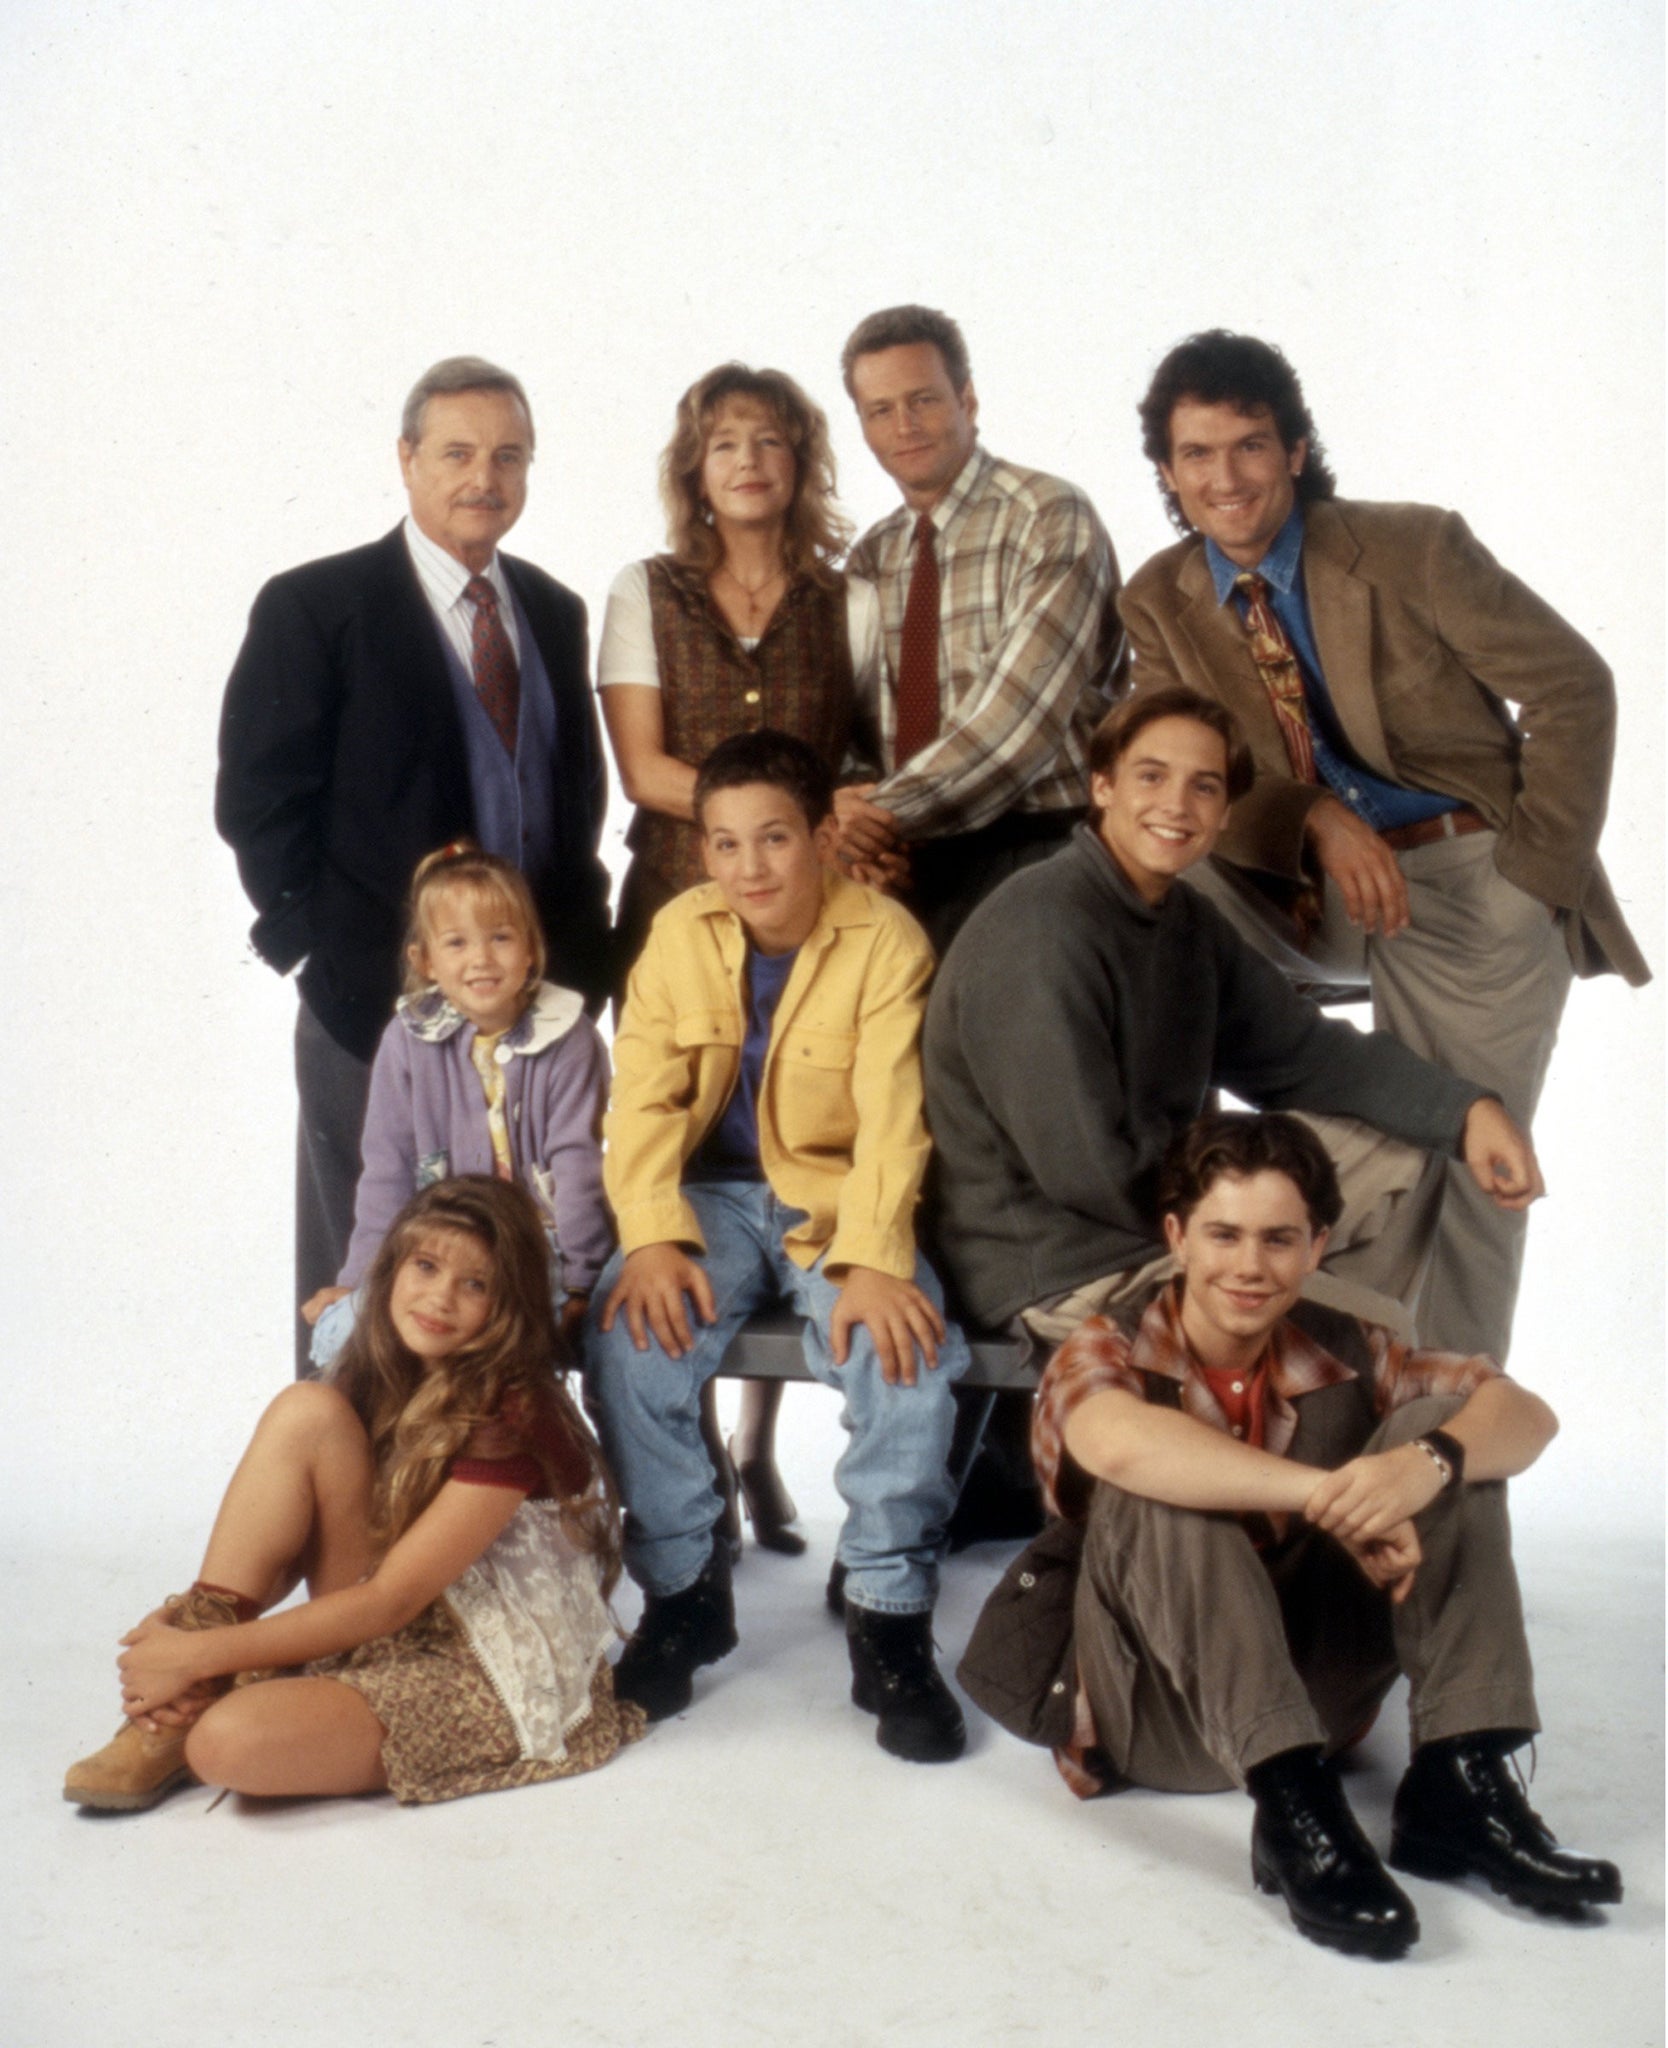 The original Boy Meets World Cast: (Top) Williams Daniels, Betsy Randle, William Russ, Anthony Tyler Quinn, (middle) Lily Nicksay, Ben Savage, Will Friedle, (bottom) Danielle Fishel, Rider Strong